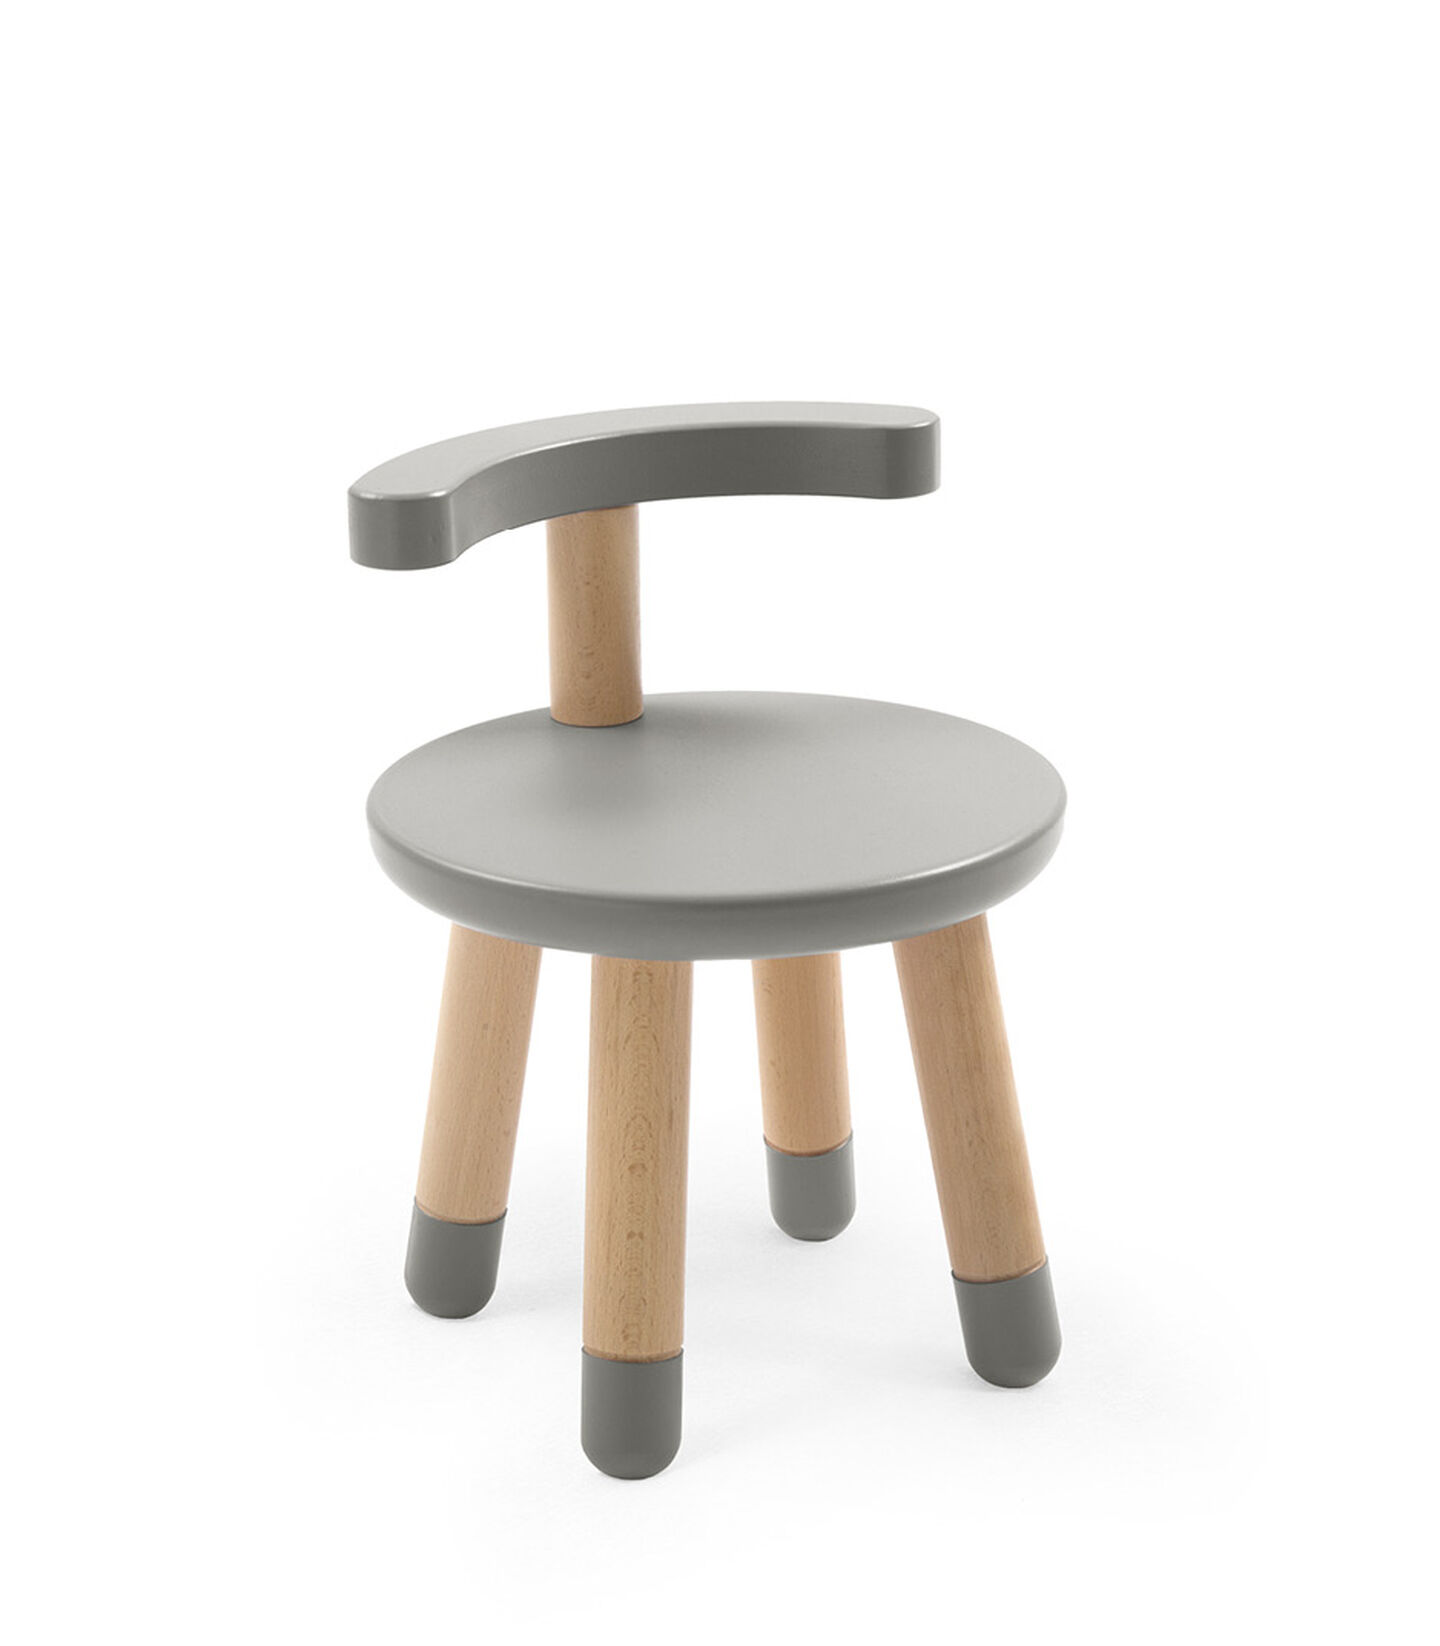 Stokke® MuTable™ Stol New Dove Grey, New Dove Grey, mainview view 1